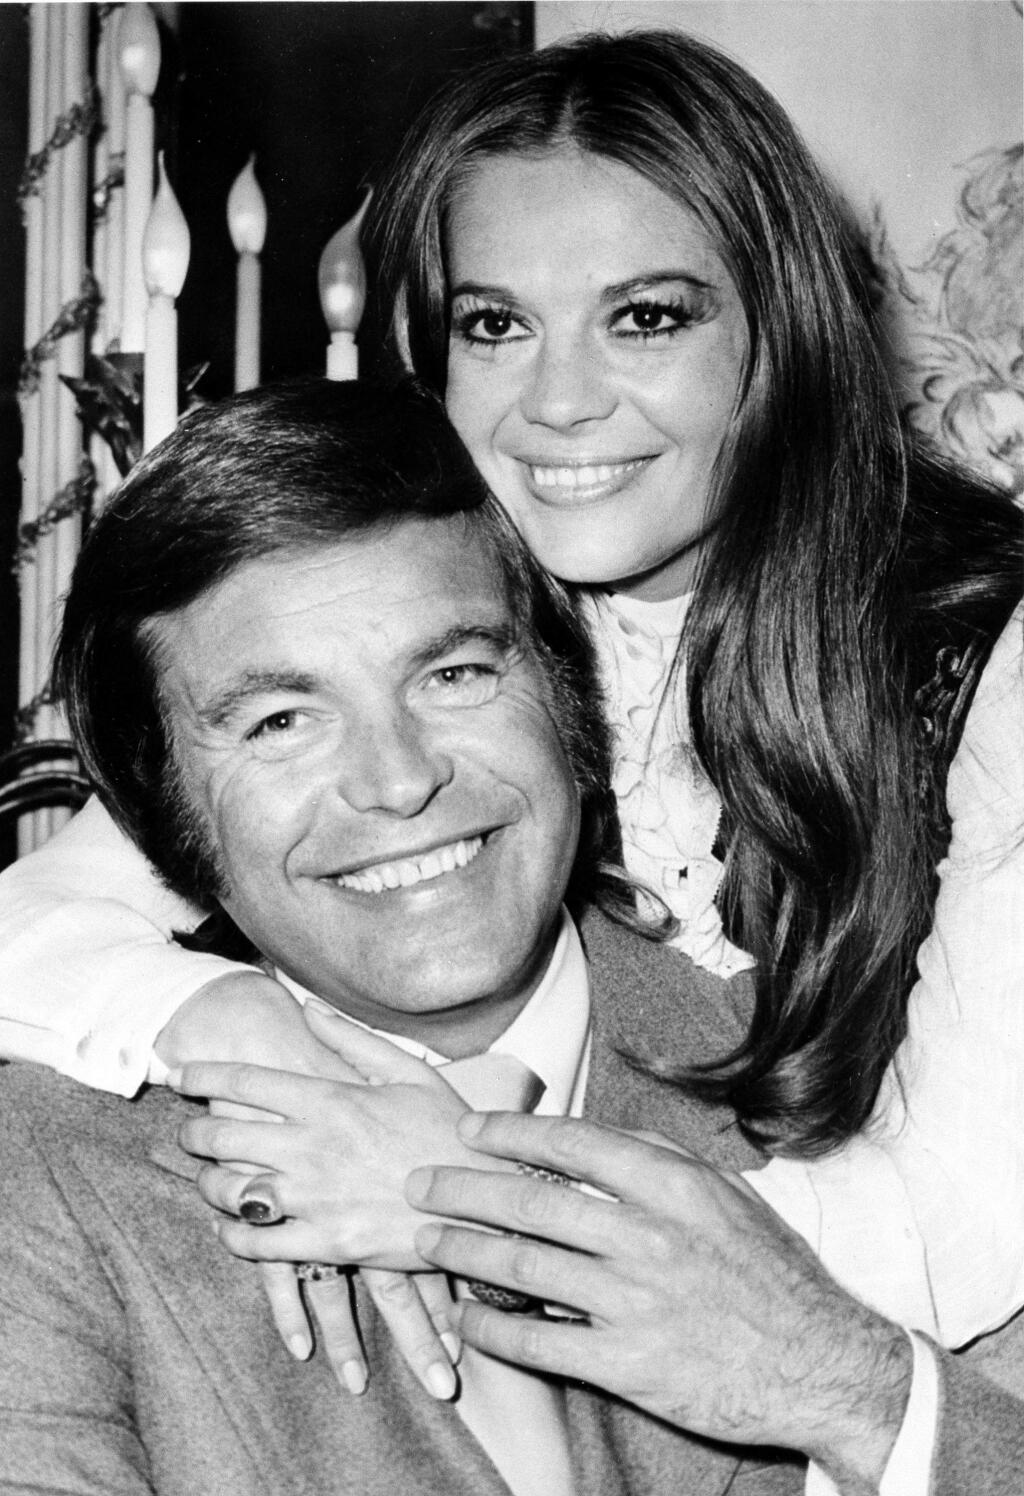 FILE - In this April 23, 1972 file photo, actor Robert Wagner and his former wife, actress Natalie Wood, pose at the Dorchester Hotel in London, England. Investigators are now calling Wagner a 'person of interest' in the 1981 death of his wife Natalie Wood. Mystery has swirled around Wood's death. It was declared an accident but police reopened the case in 2011 to see whether Wagner or anyone else played a role (AP File Photo)